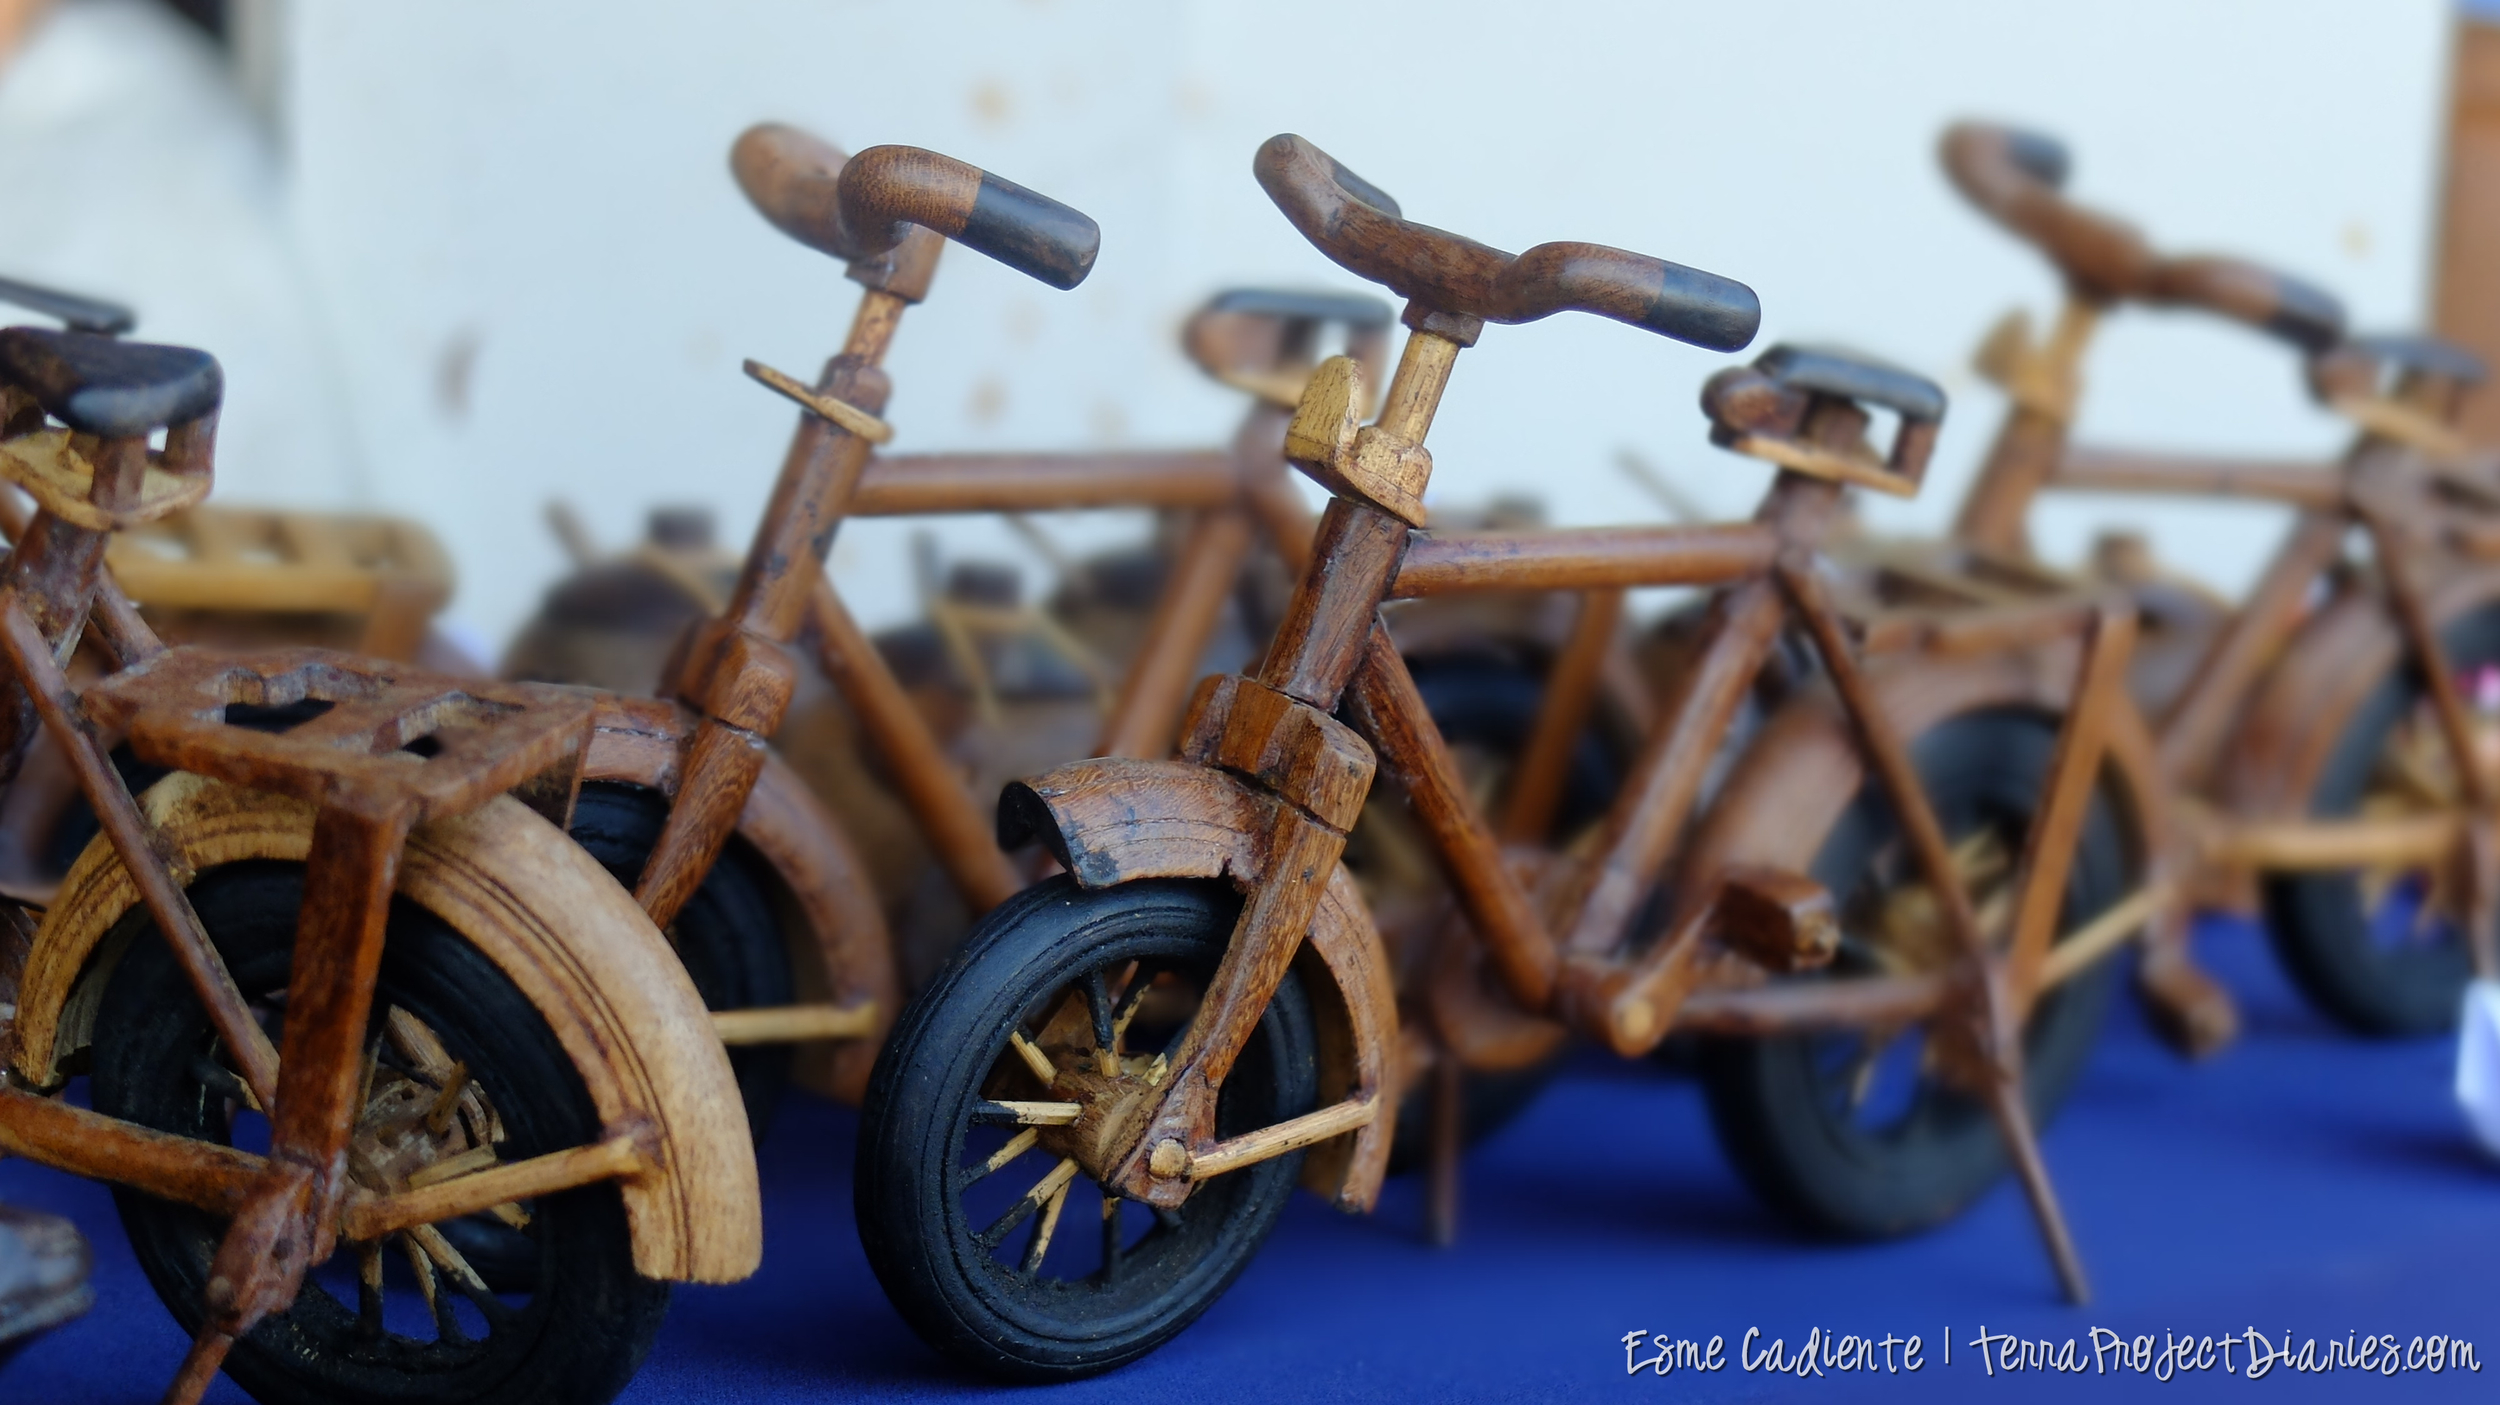 Intricate bicycles made by a Sri Lankan man